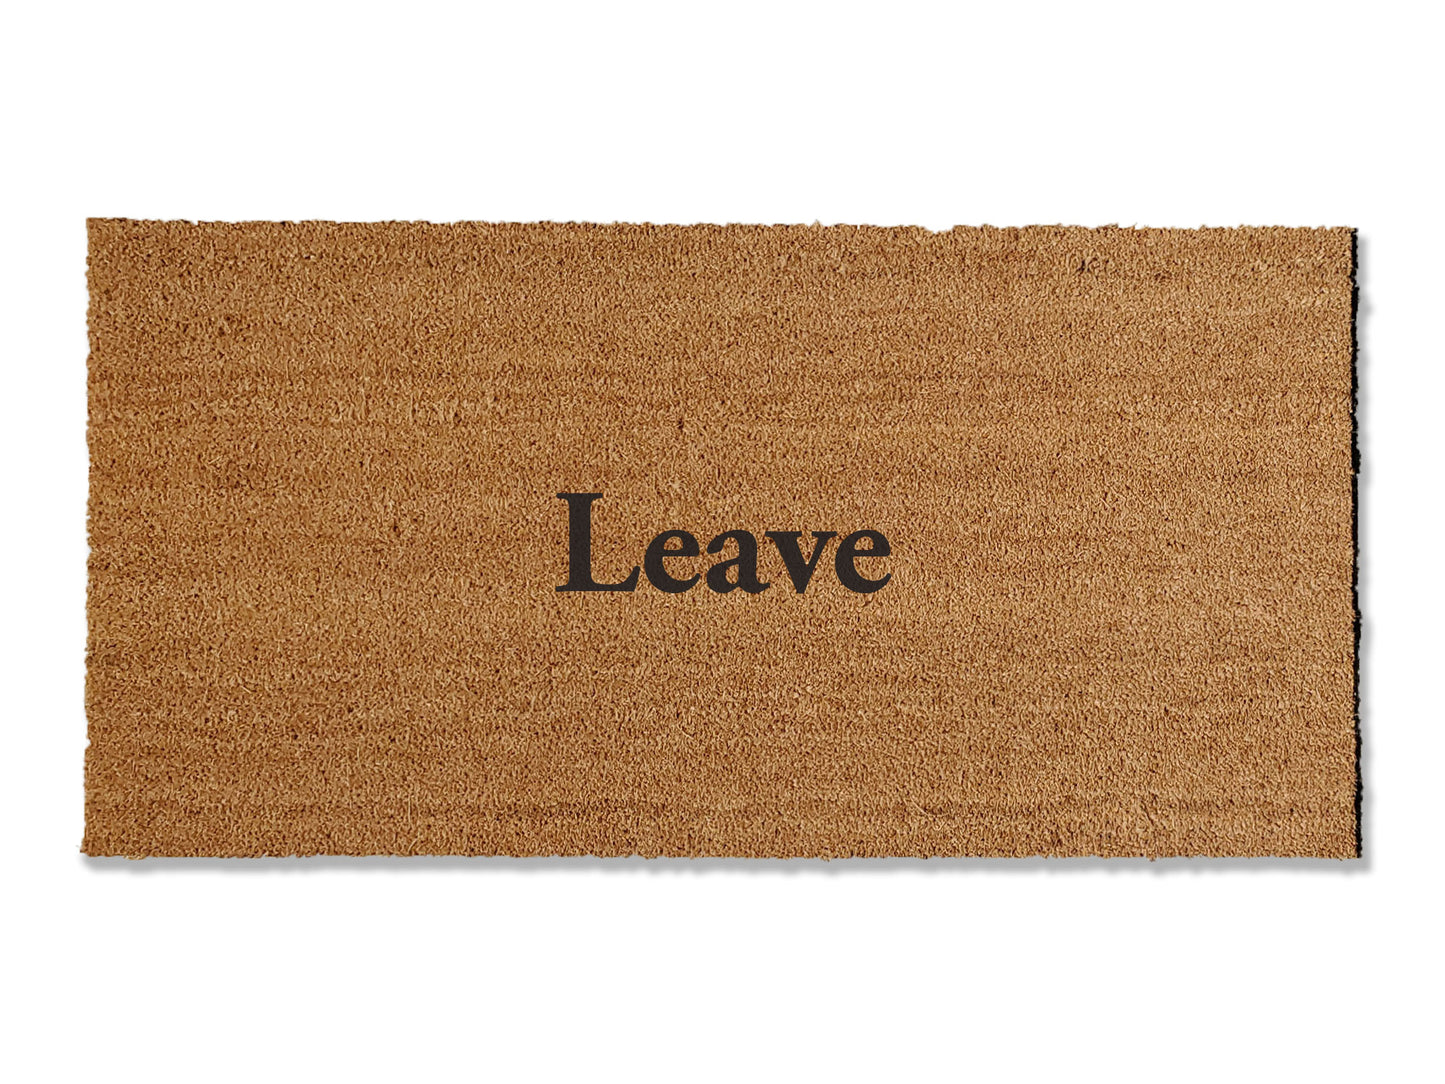 Add a touch of humor to your doorstep with our cheeky coir doormat boldly stating 'Leave.' This funny and somewhat rude mat is available in multiple sizes, promising to keep guests laughing or playfully deterring unwelcome visitors. Not only does it add a unique flair, but it's also highly effective at trapping dirt for a clean entrance.